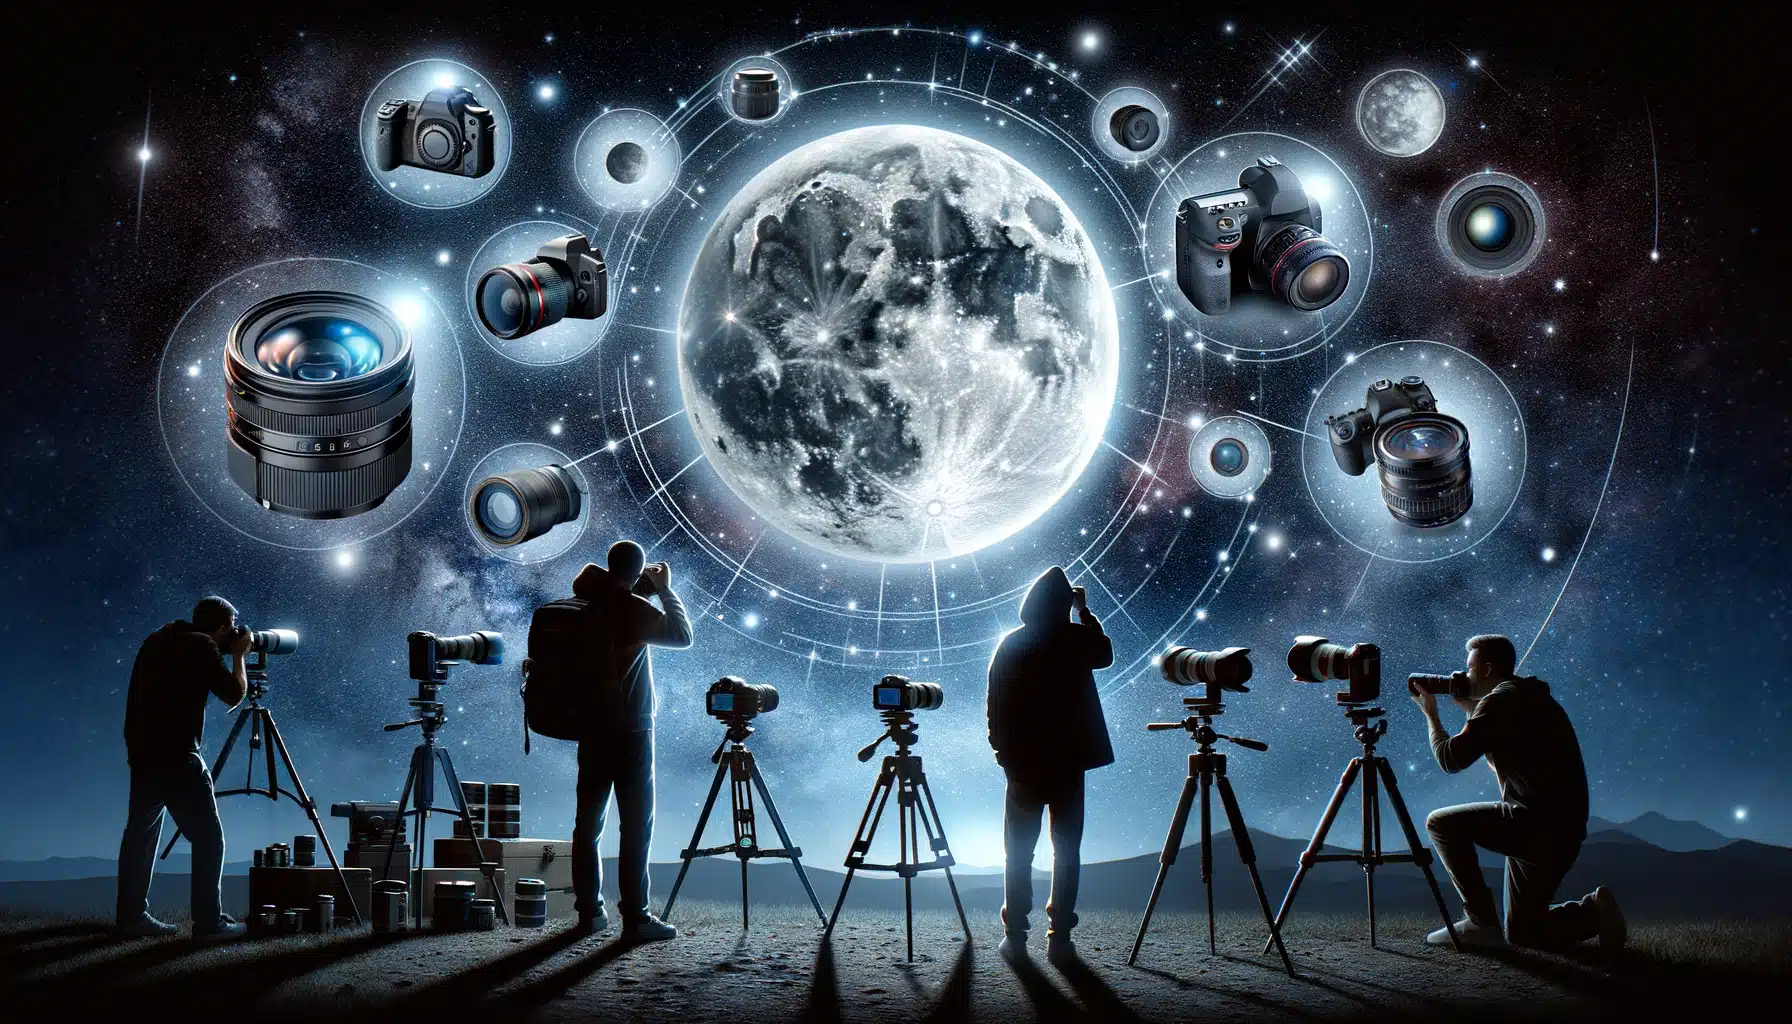 Two photographers capturing the moon and stars at night, surrounded by various professional Camcorders and lenses for comparison.